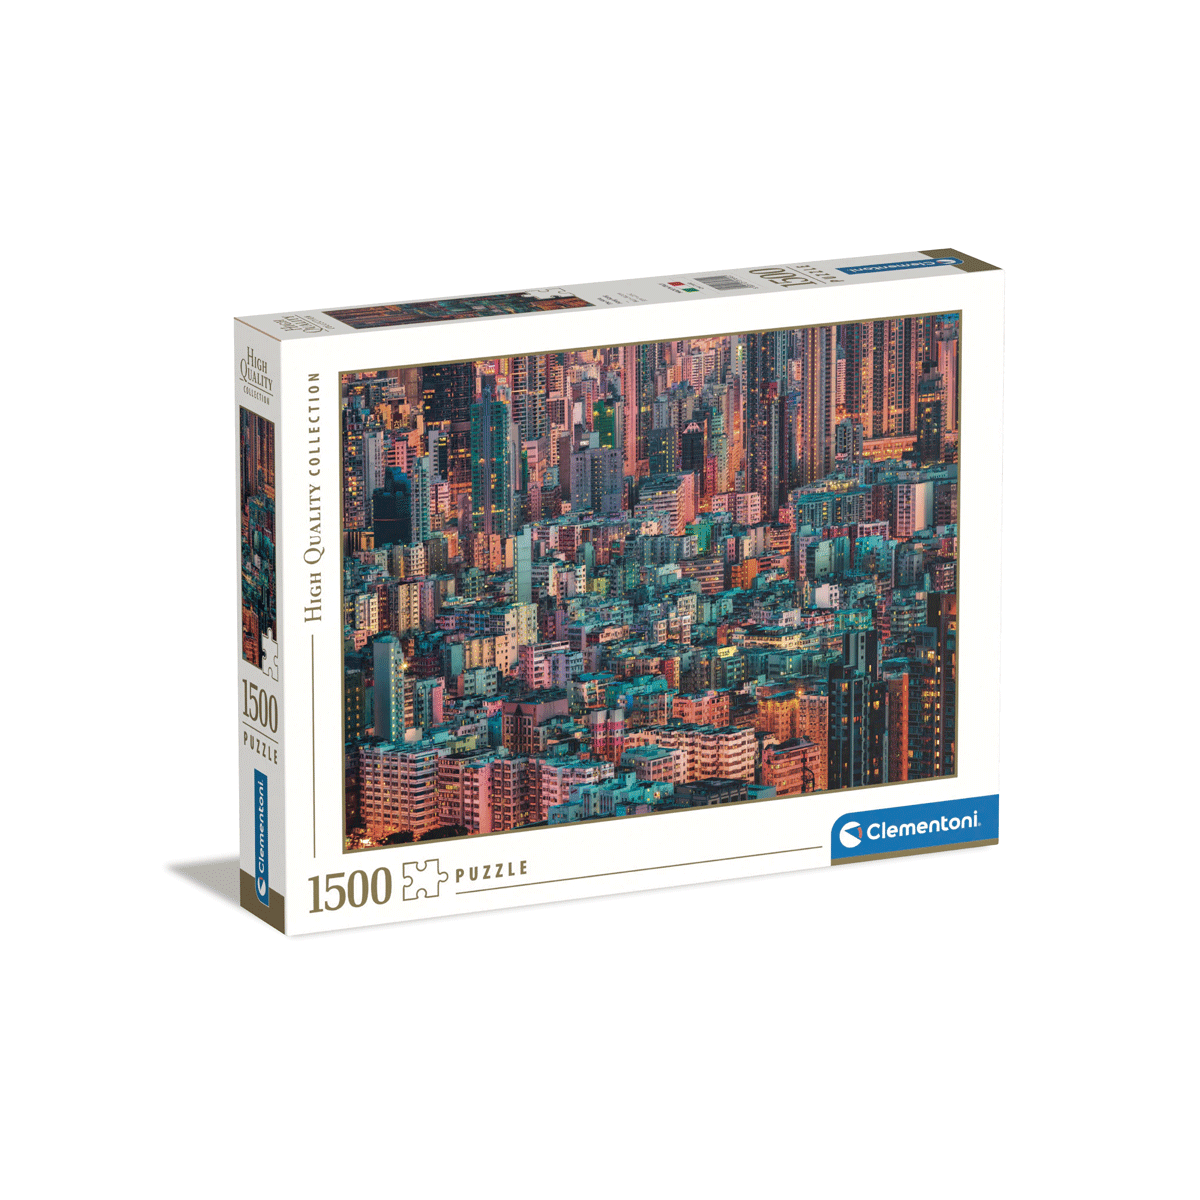 Clementoni puzzle high quality collection - the hive, hong kong - 1500 pezzi, puzzle adulti - CLEMENTONI